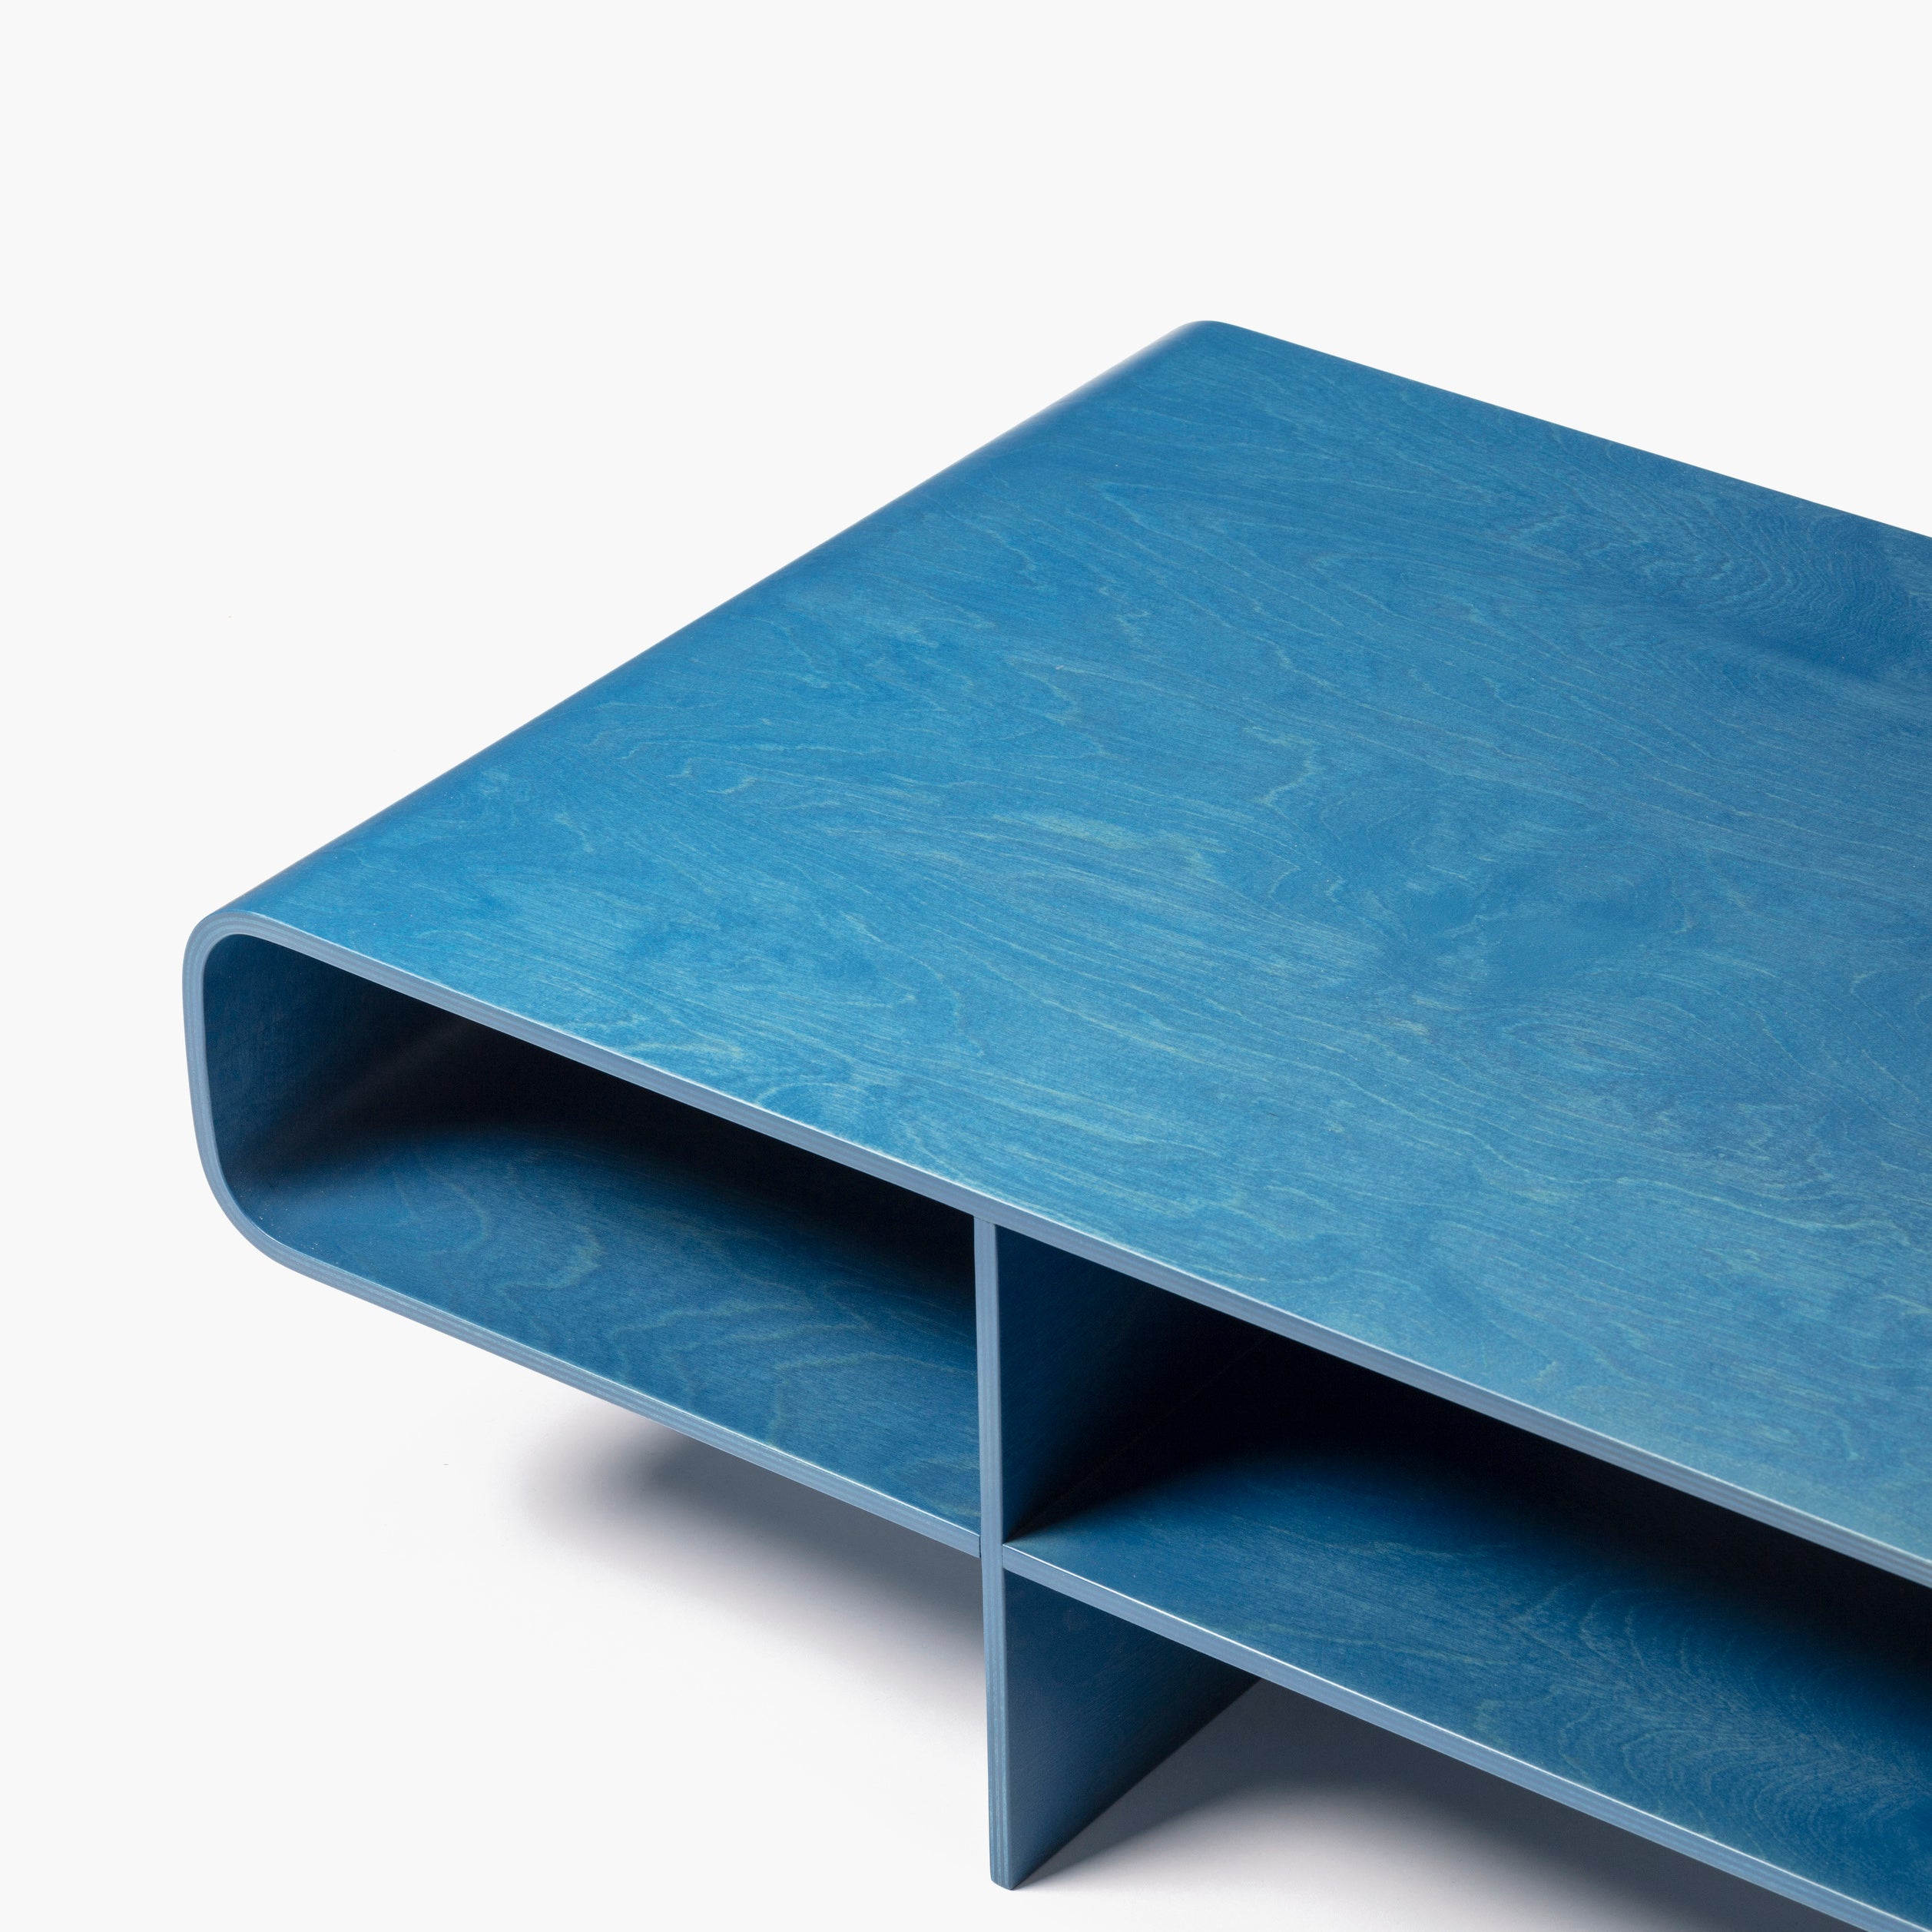 Loop Coffee Table: Limited Edition